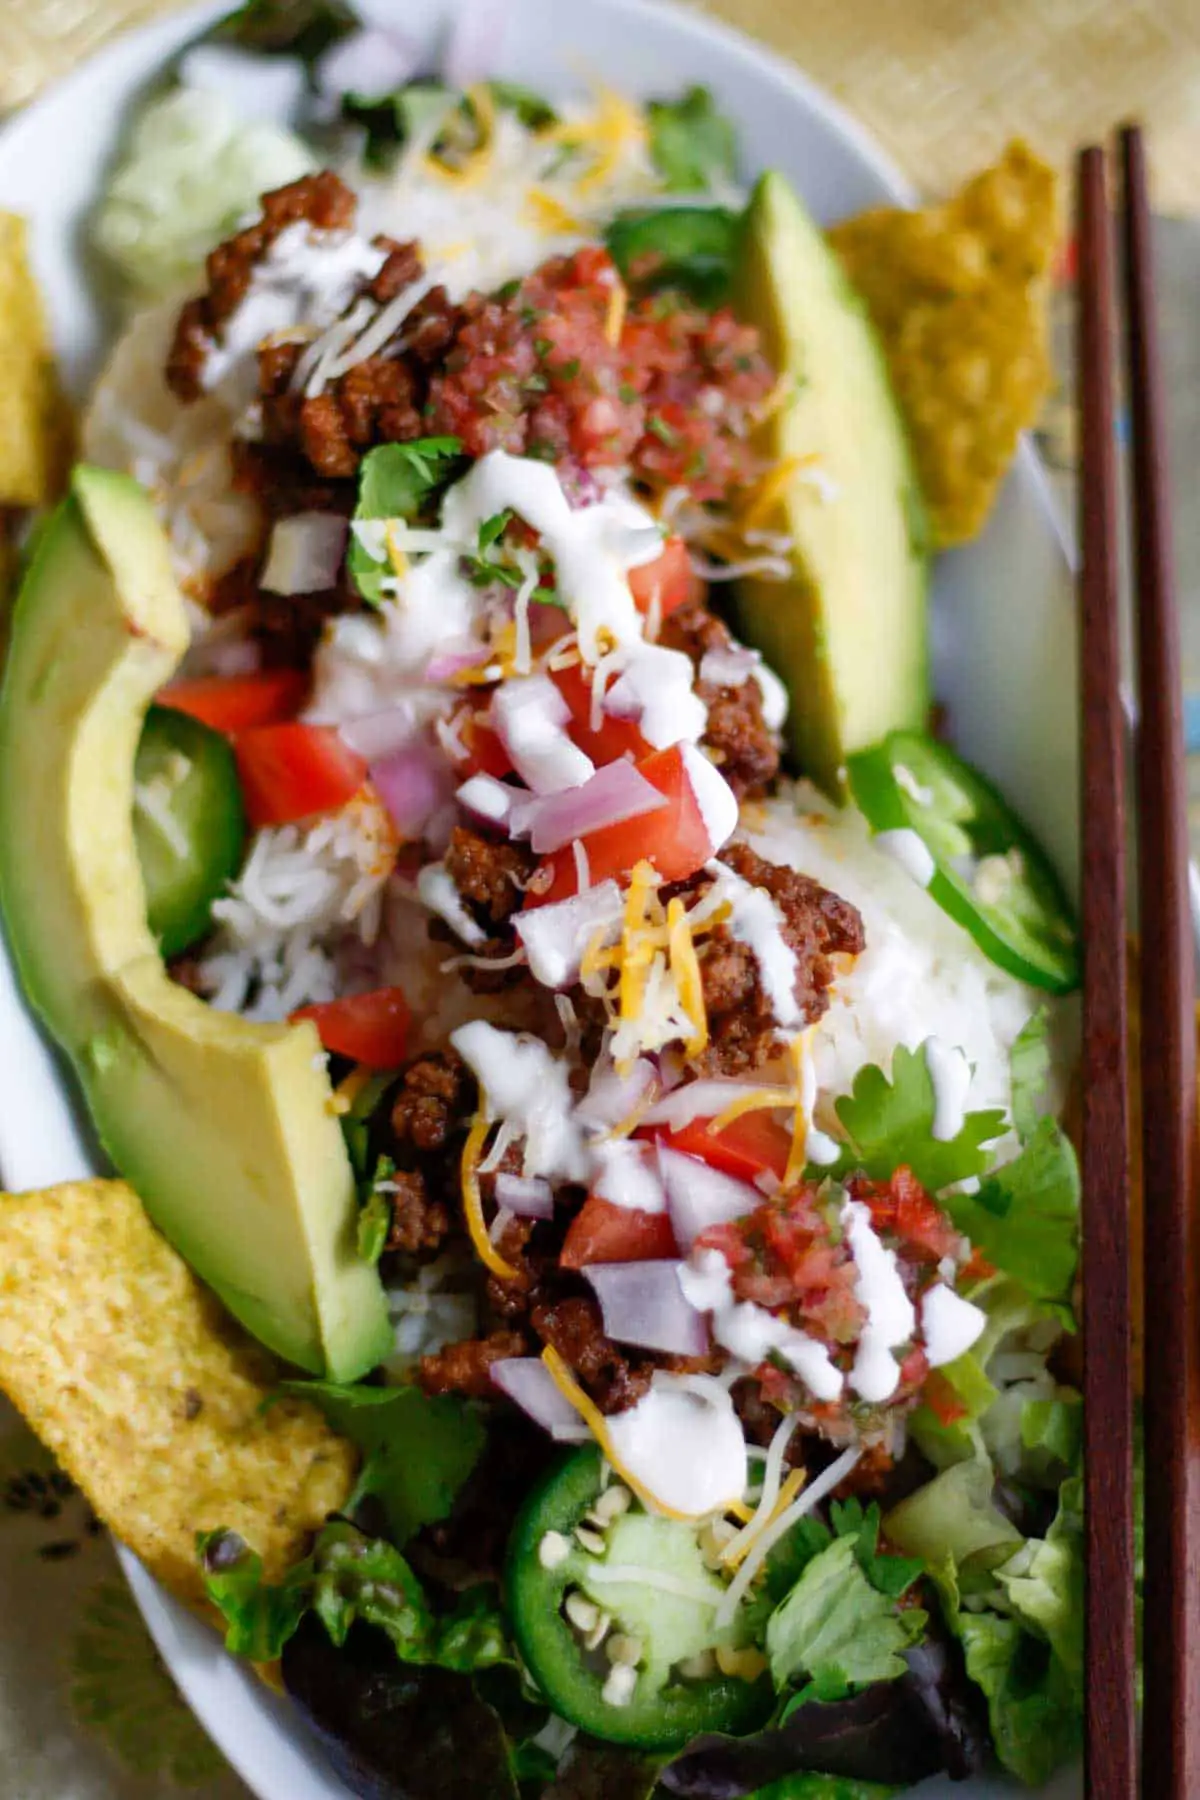 Japanese Taco rice which is rice topped with taco seasoned ground beef garnished with avocado, diced tomato and onion, sliced jalapenos, shredded lettuce and cheese, sour cream and salsa in a white dish.